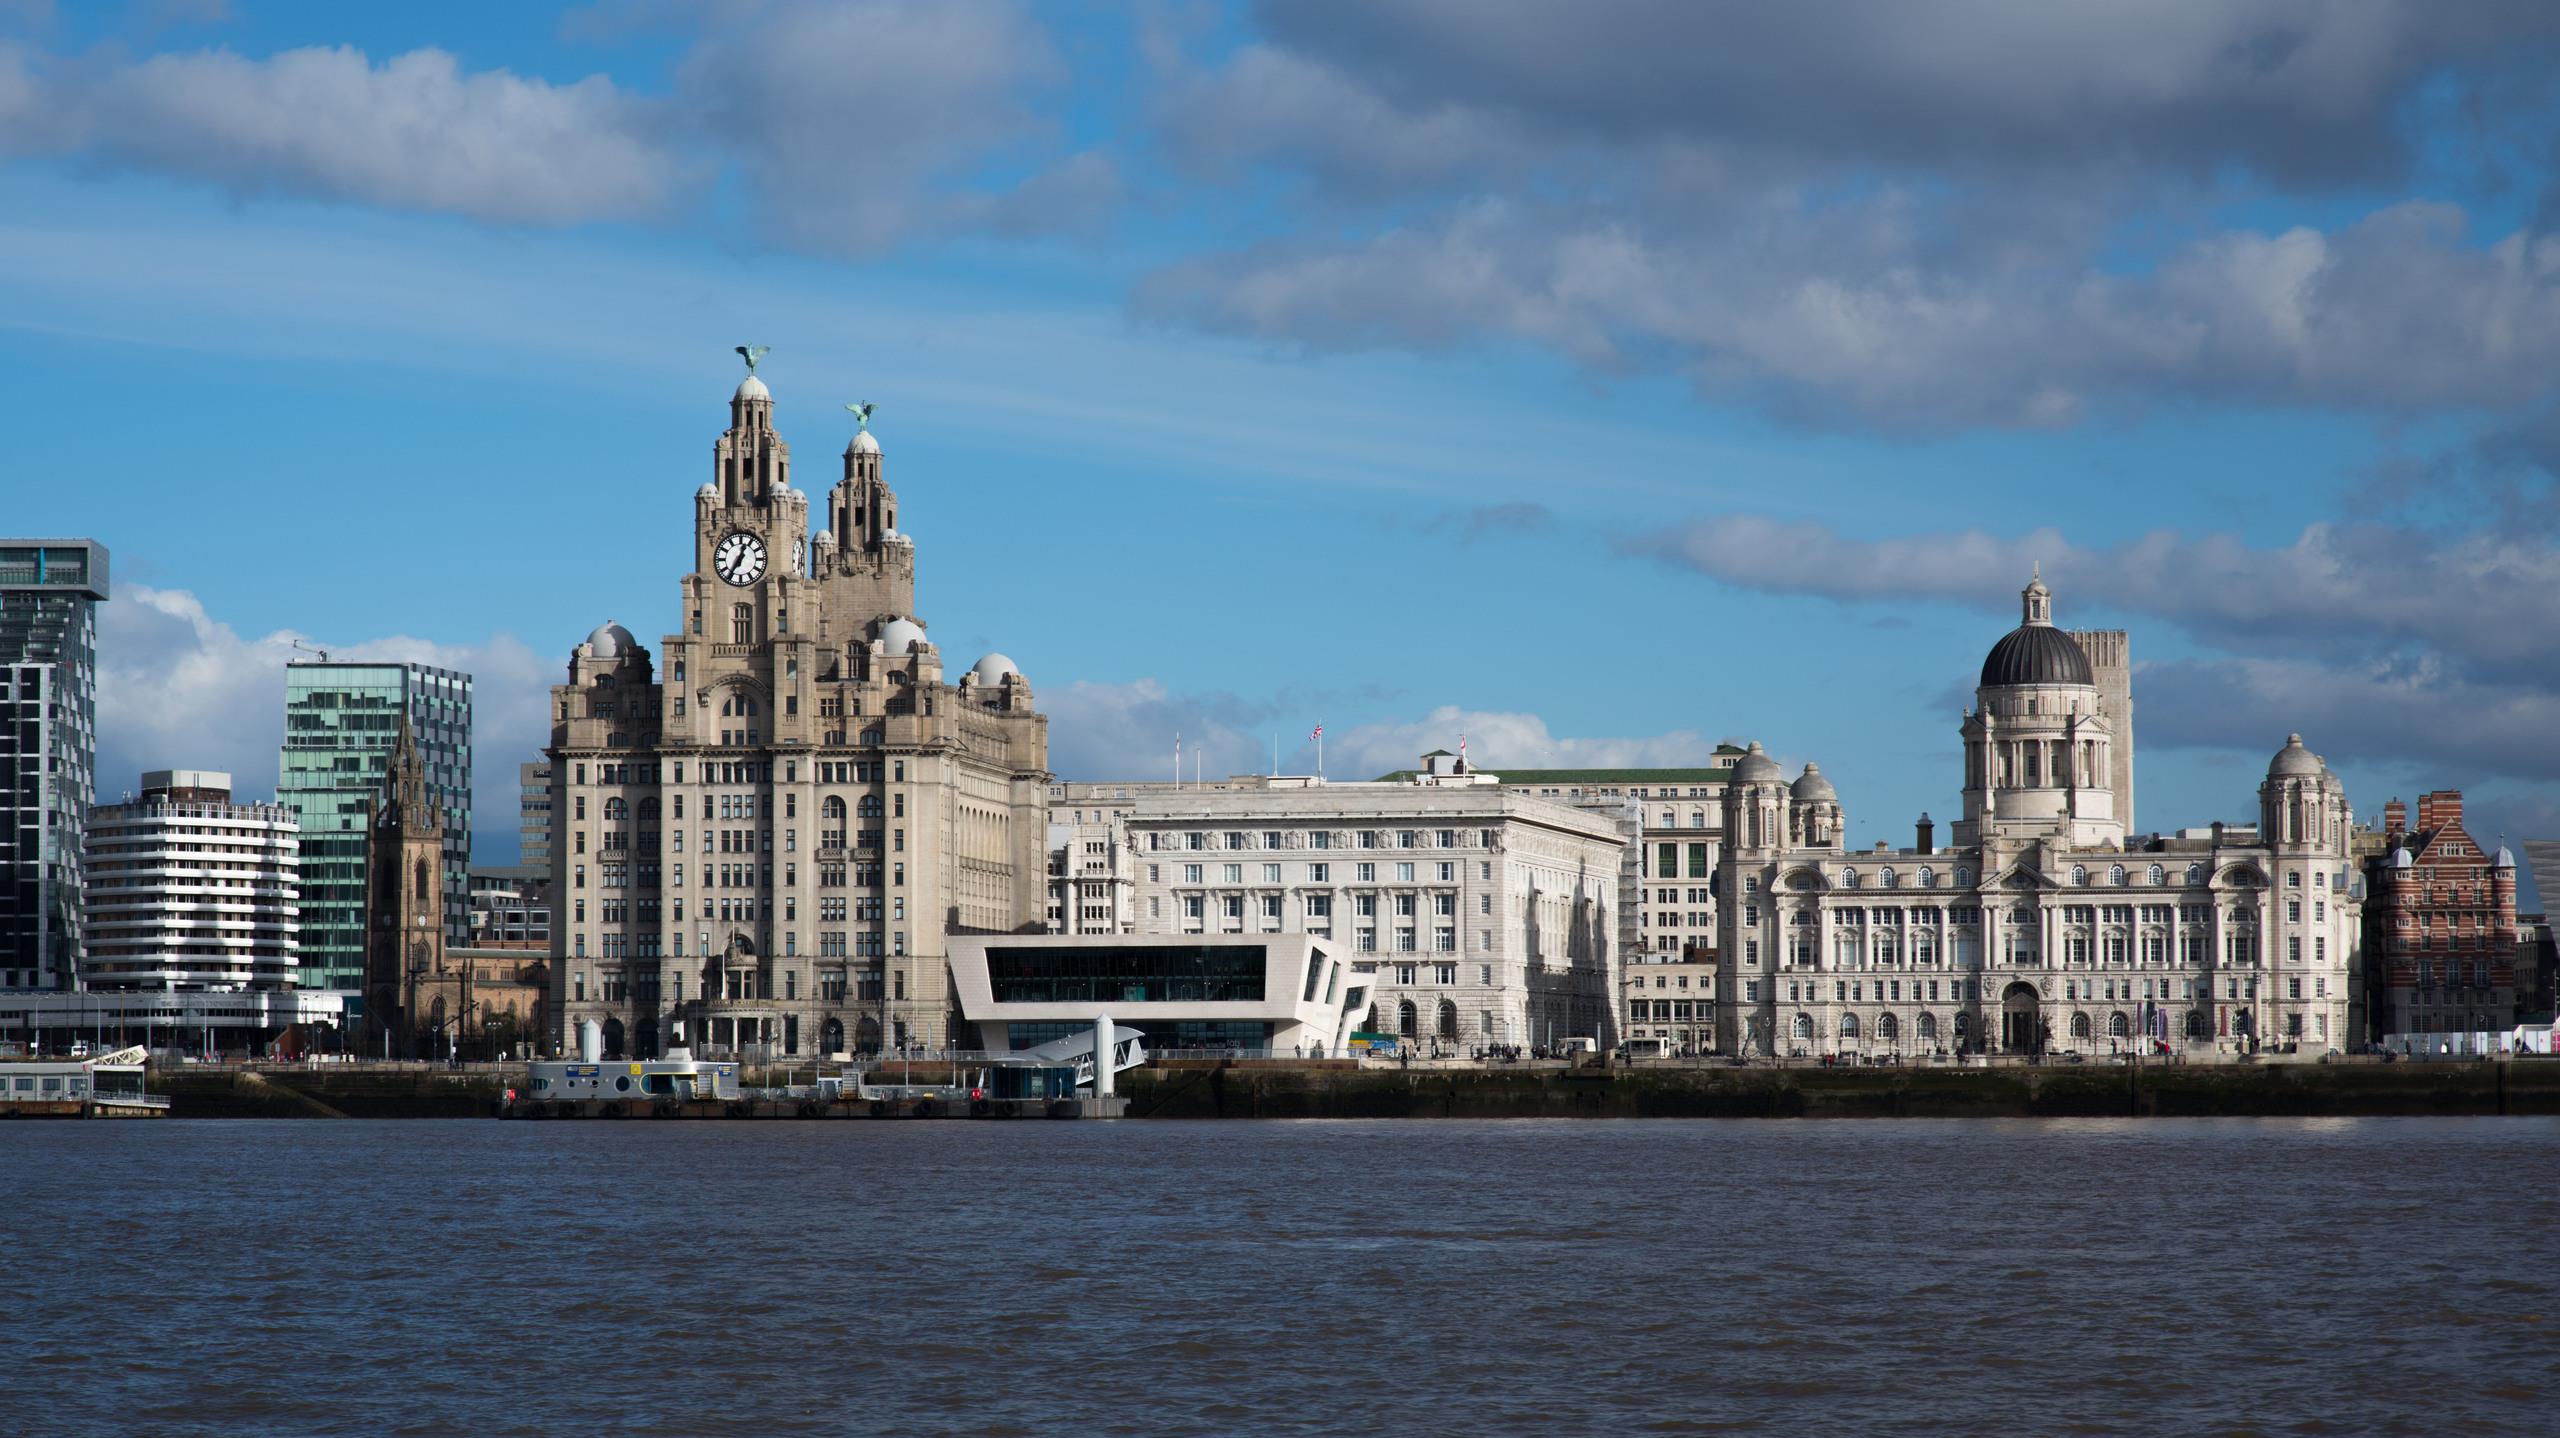 A view of Liverpool city centre from the outside